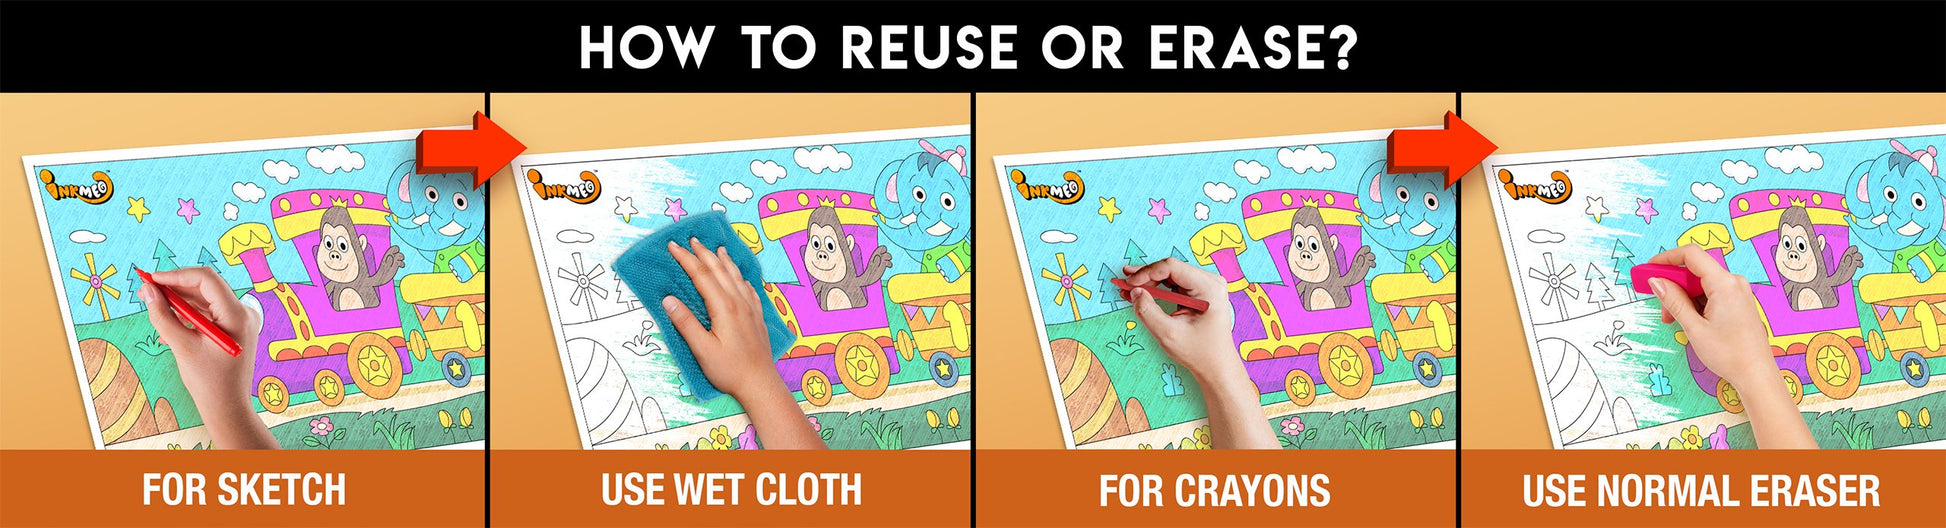 The image has an orange background with four pictures demonstrating how to reuse or erase: the first picture depicts sketching on the numbers sheet, the second shows using a wet cloth to remove sketches, the third image displays crayons colouring on the numbers sheet, and the fourth image illustrates erasing crayons with a regular eraser.